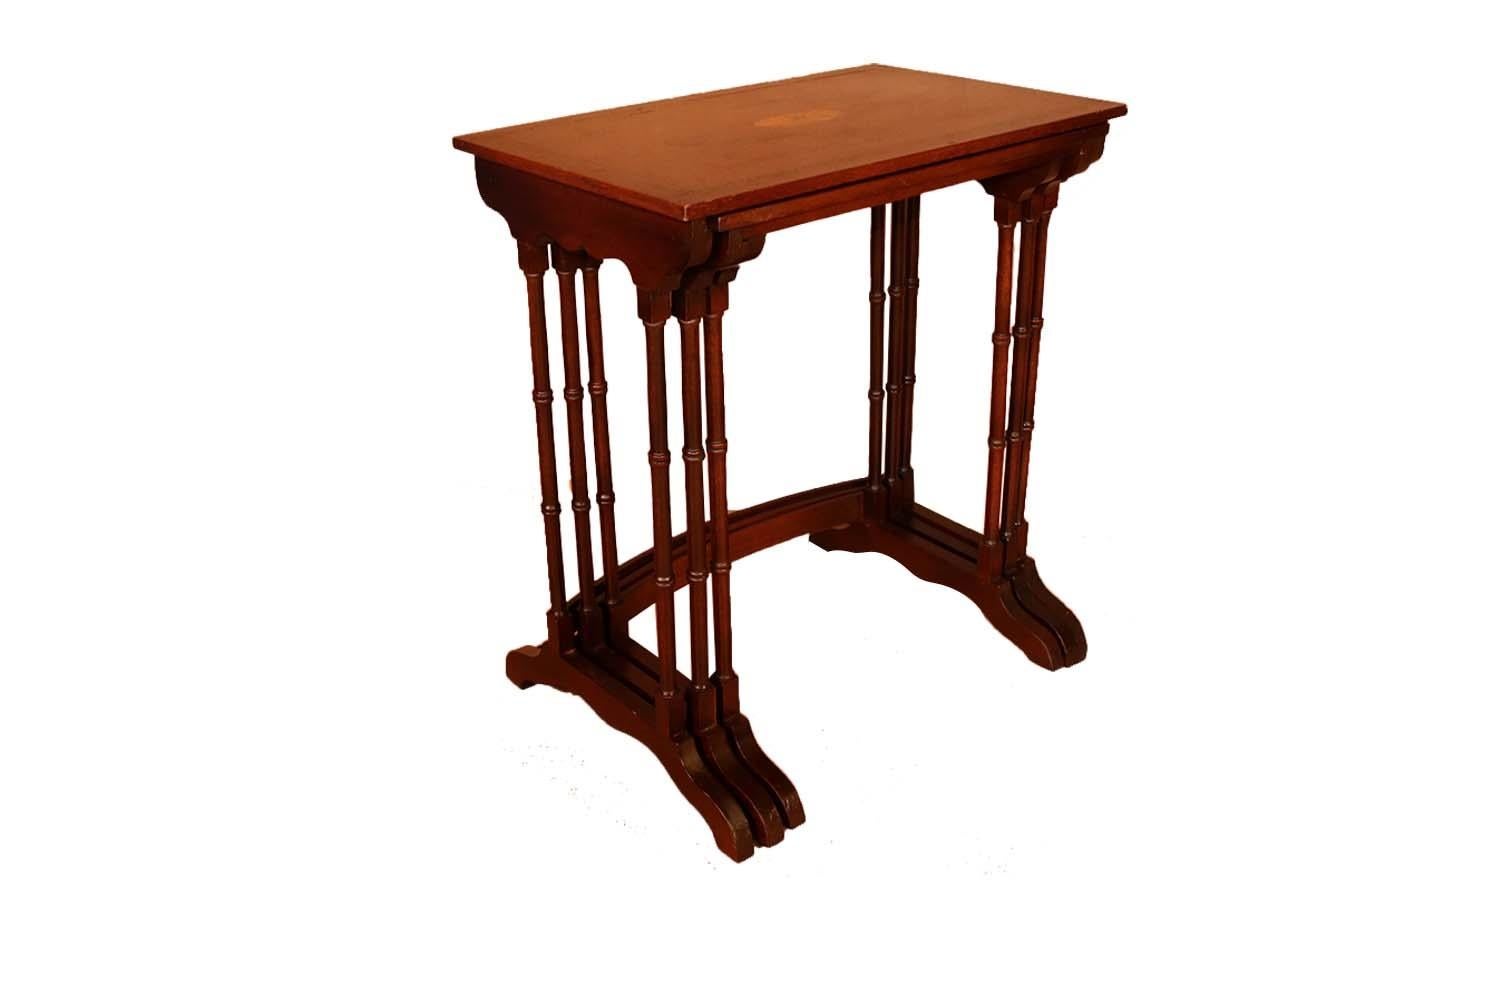 An elegant Federal style mahogany and satinwood trio of nesting tables. This rare, attractive set features a mahogany veneer top framed in a satinwood and ebony stringer with a centered satinwood fan medallion. The lovely top rests on a scalloped